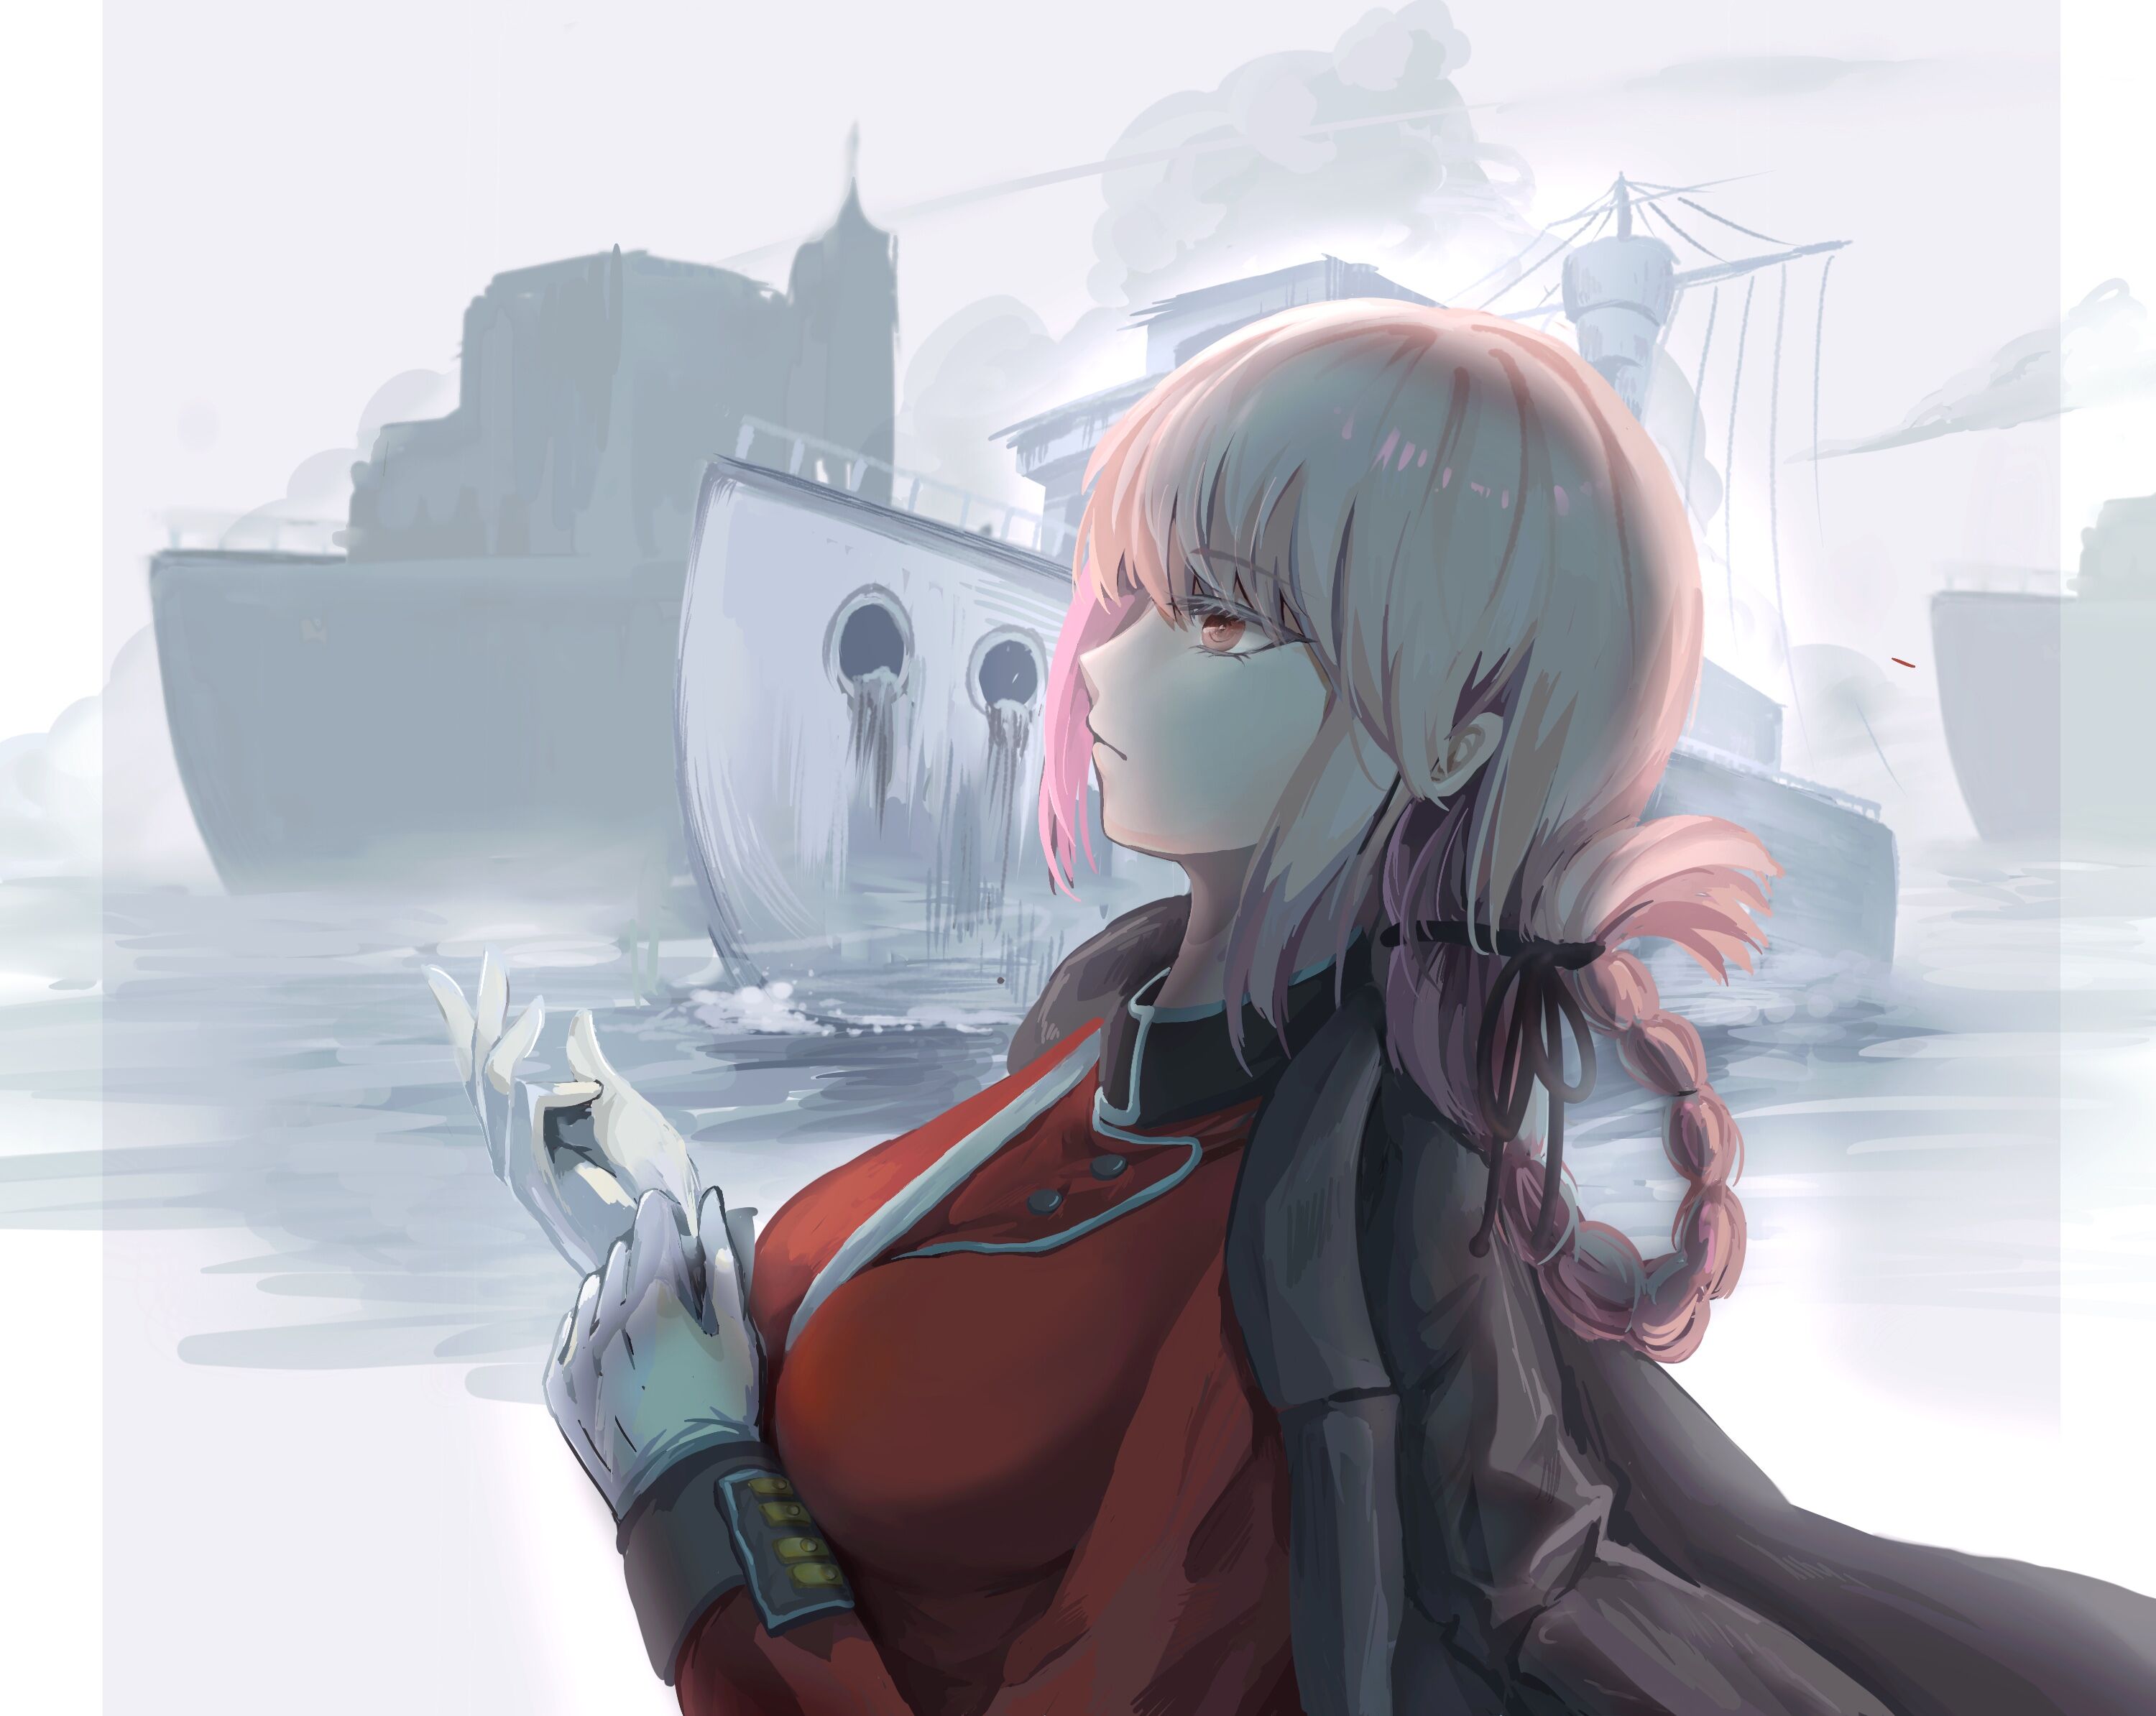 Anime Anime Girls Fate Series Fate Grand Order Florence Nightingale Fate Grand Order Long Hair Blond 3000x2388